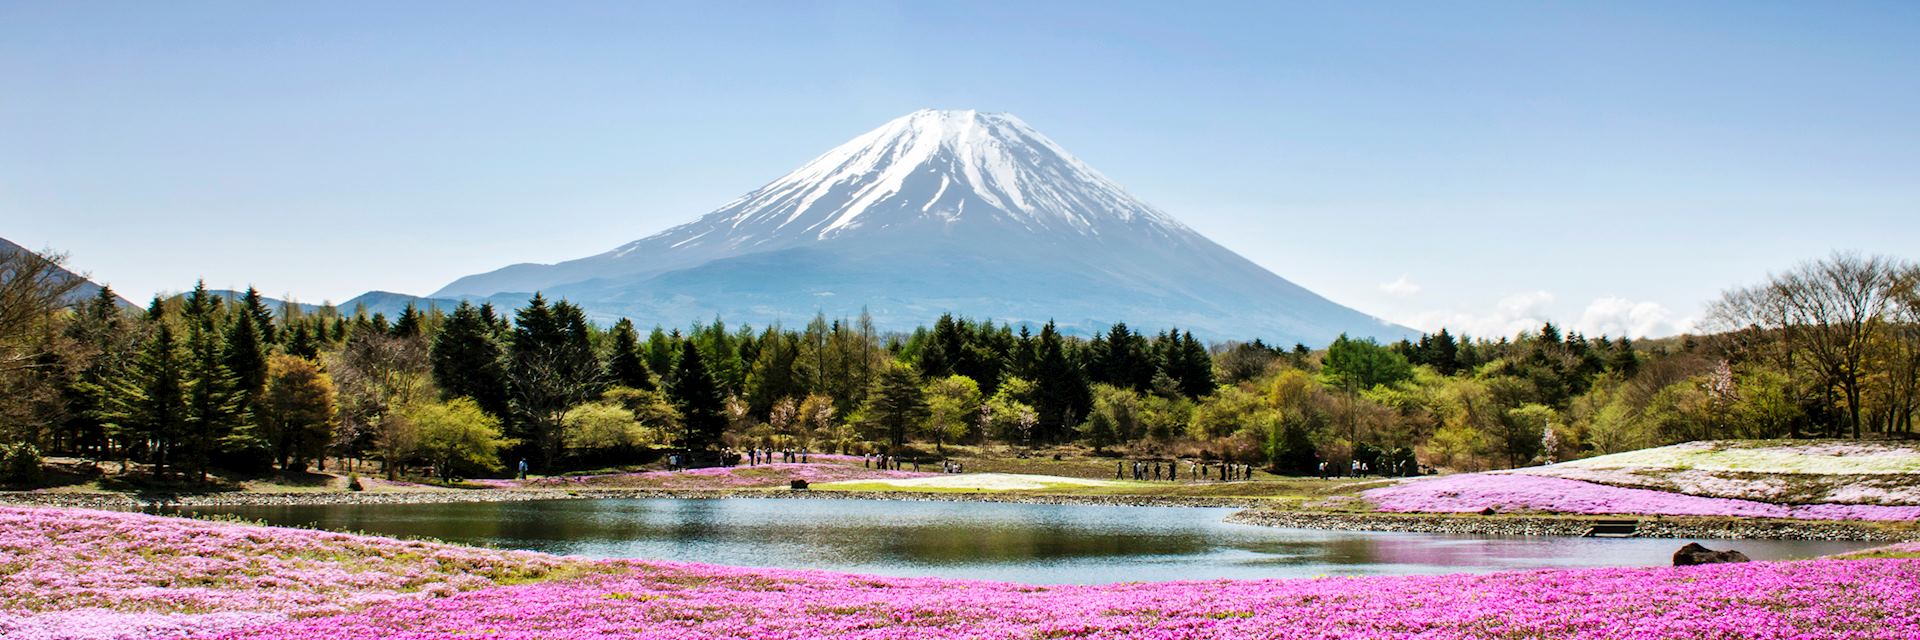 Plan Your Trip To Mount Fuji, Japan | Where To Go | Audley Travel